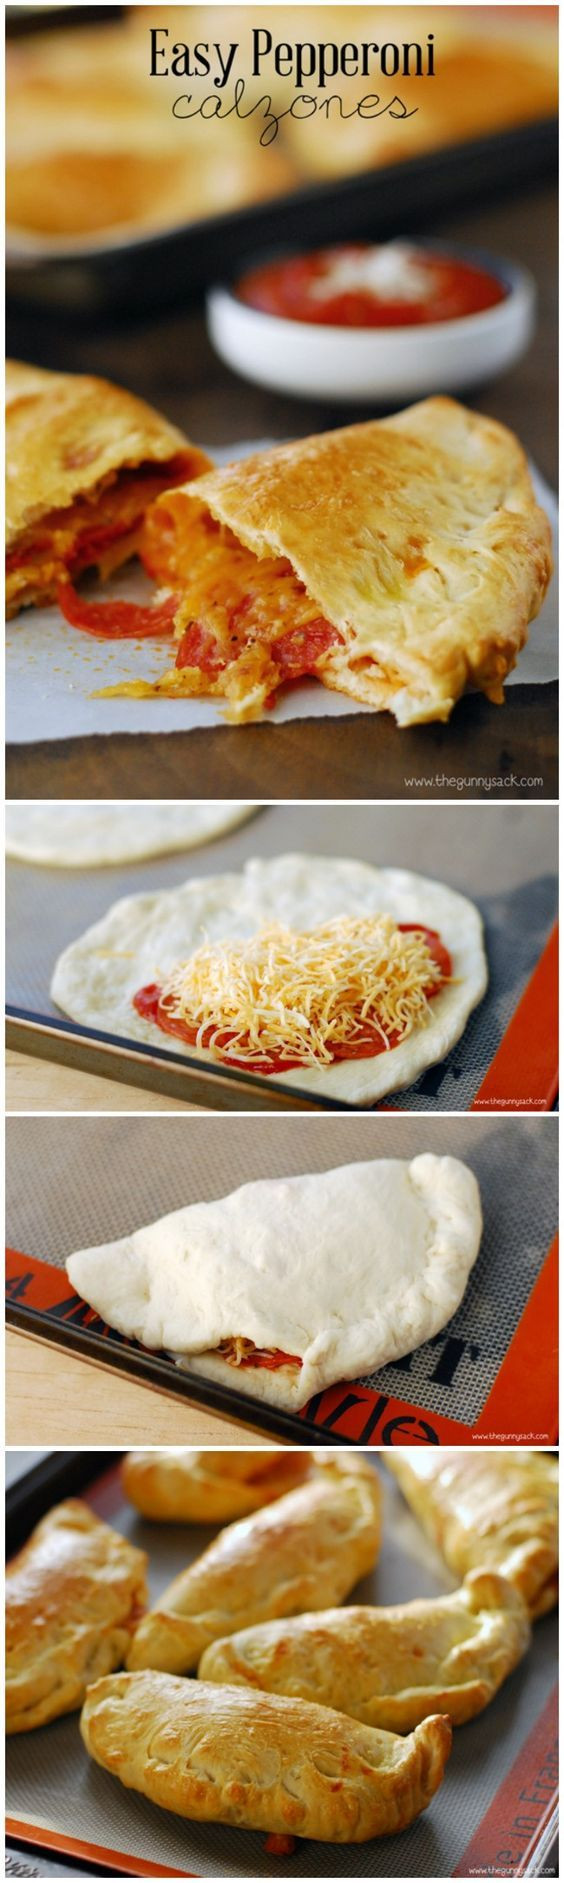 Calzone Recipe With Premade Pizza Dough
 Pepperoni Calzones are easy to make with frozen bread